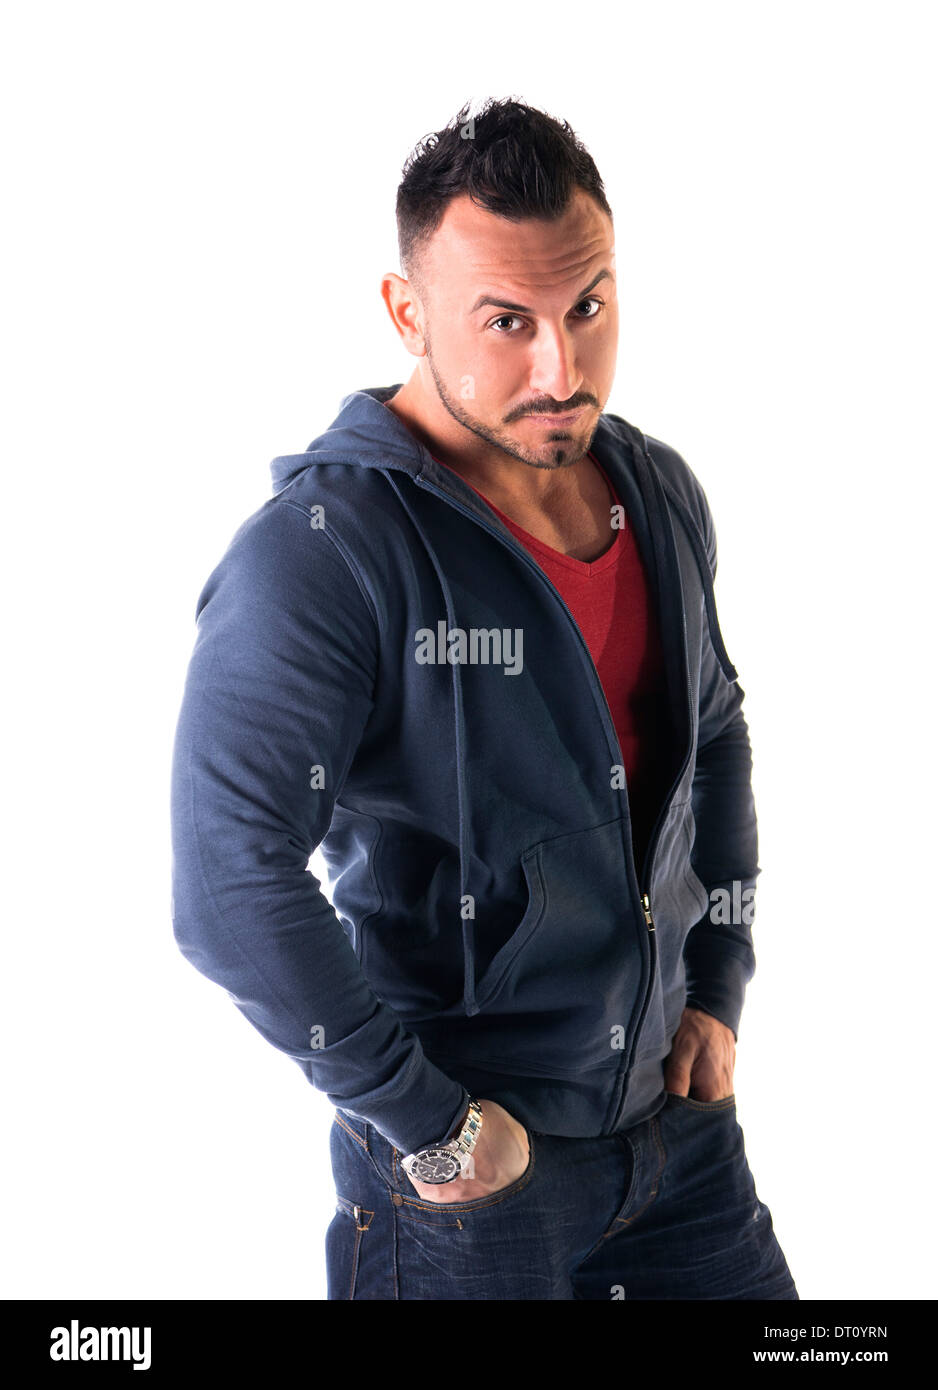 Muscular man with sweatshirt, hands in his pockets, looking at camera, isolated on white Stock Photo